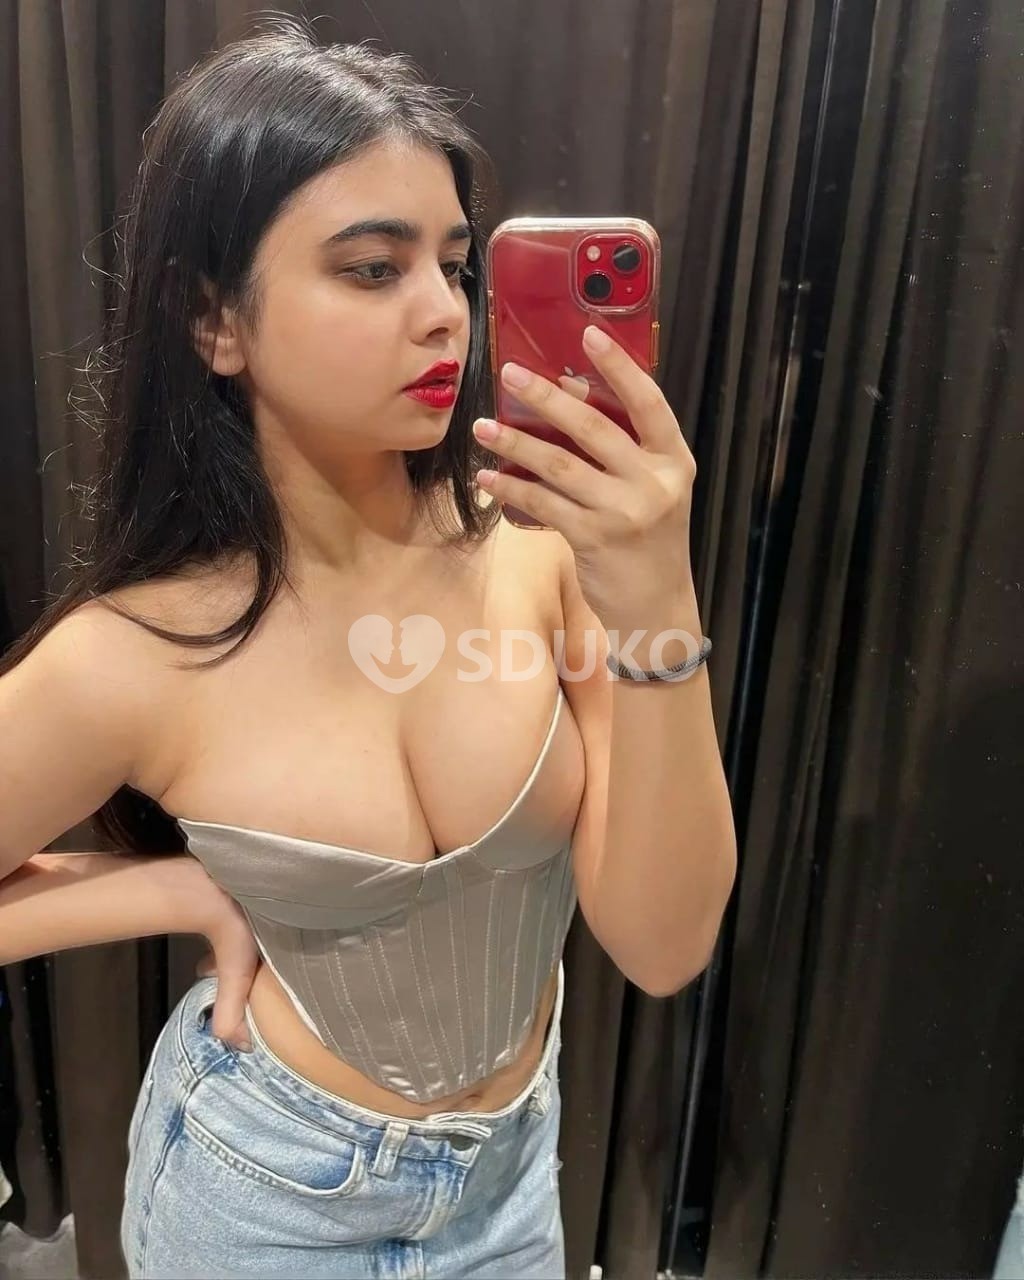 Bhiwandi ❤️24x7 AFFORDABLE CHEAPEST RATE SAFE CALL GIRL SERVICE..